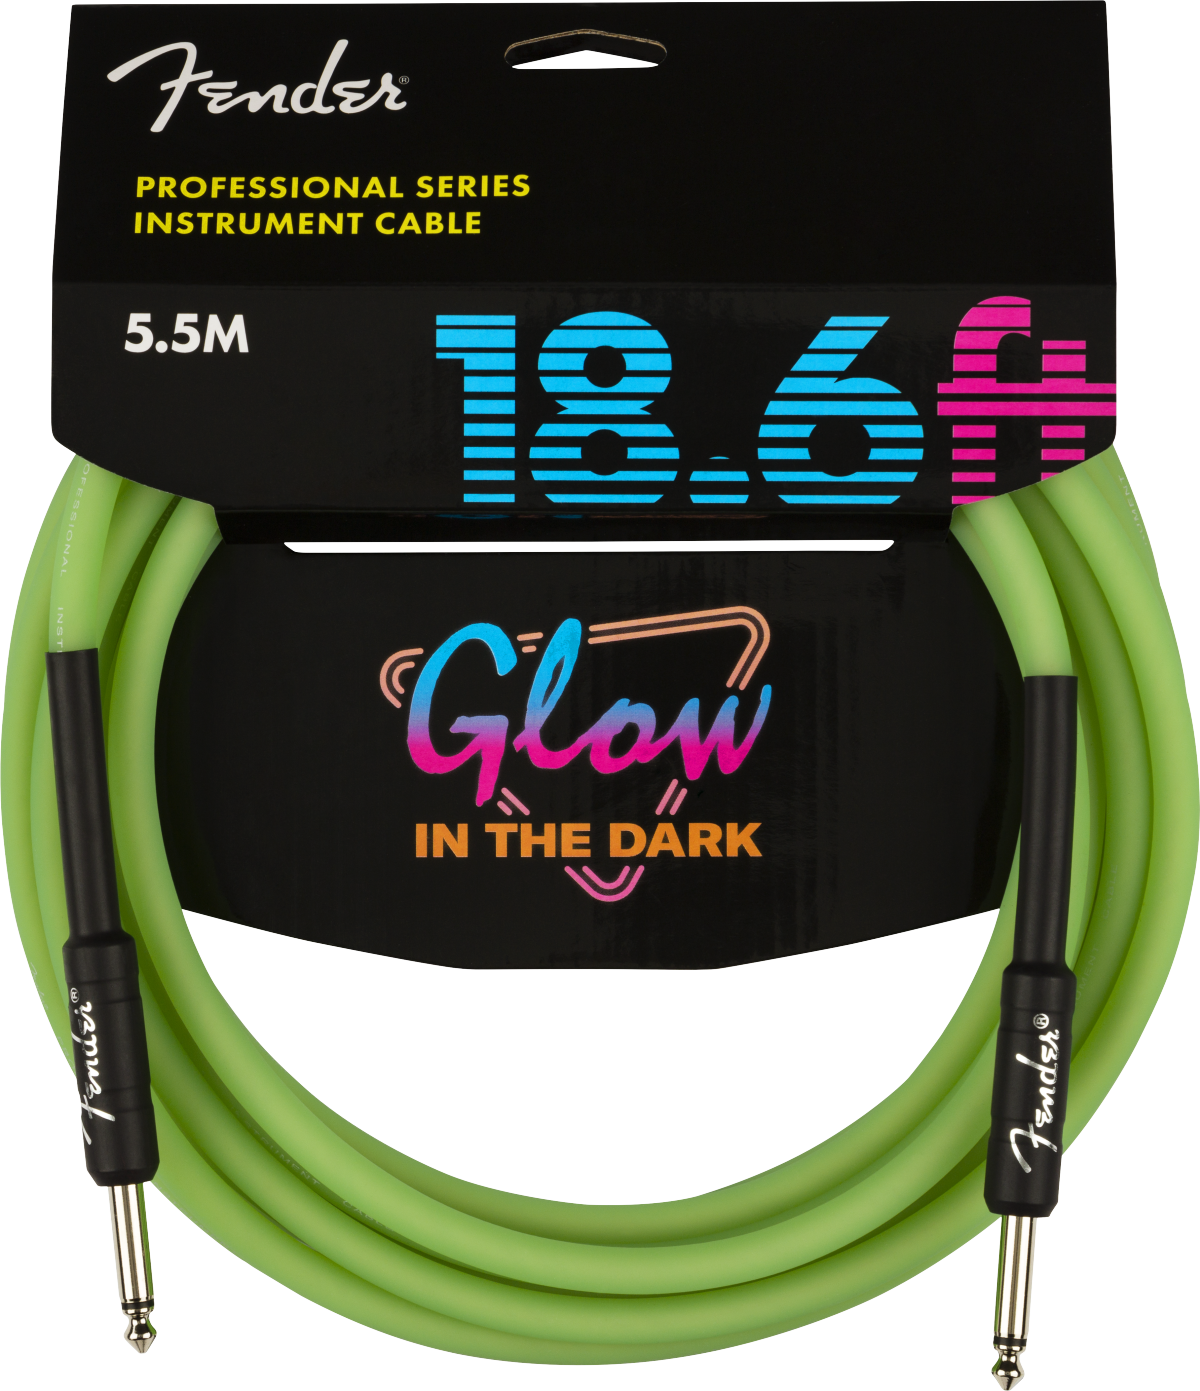 Fender Pro Glow In The Dark Instrument Cable Droit/droit 18.6ft Green - Cable - Variation 1